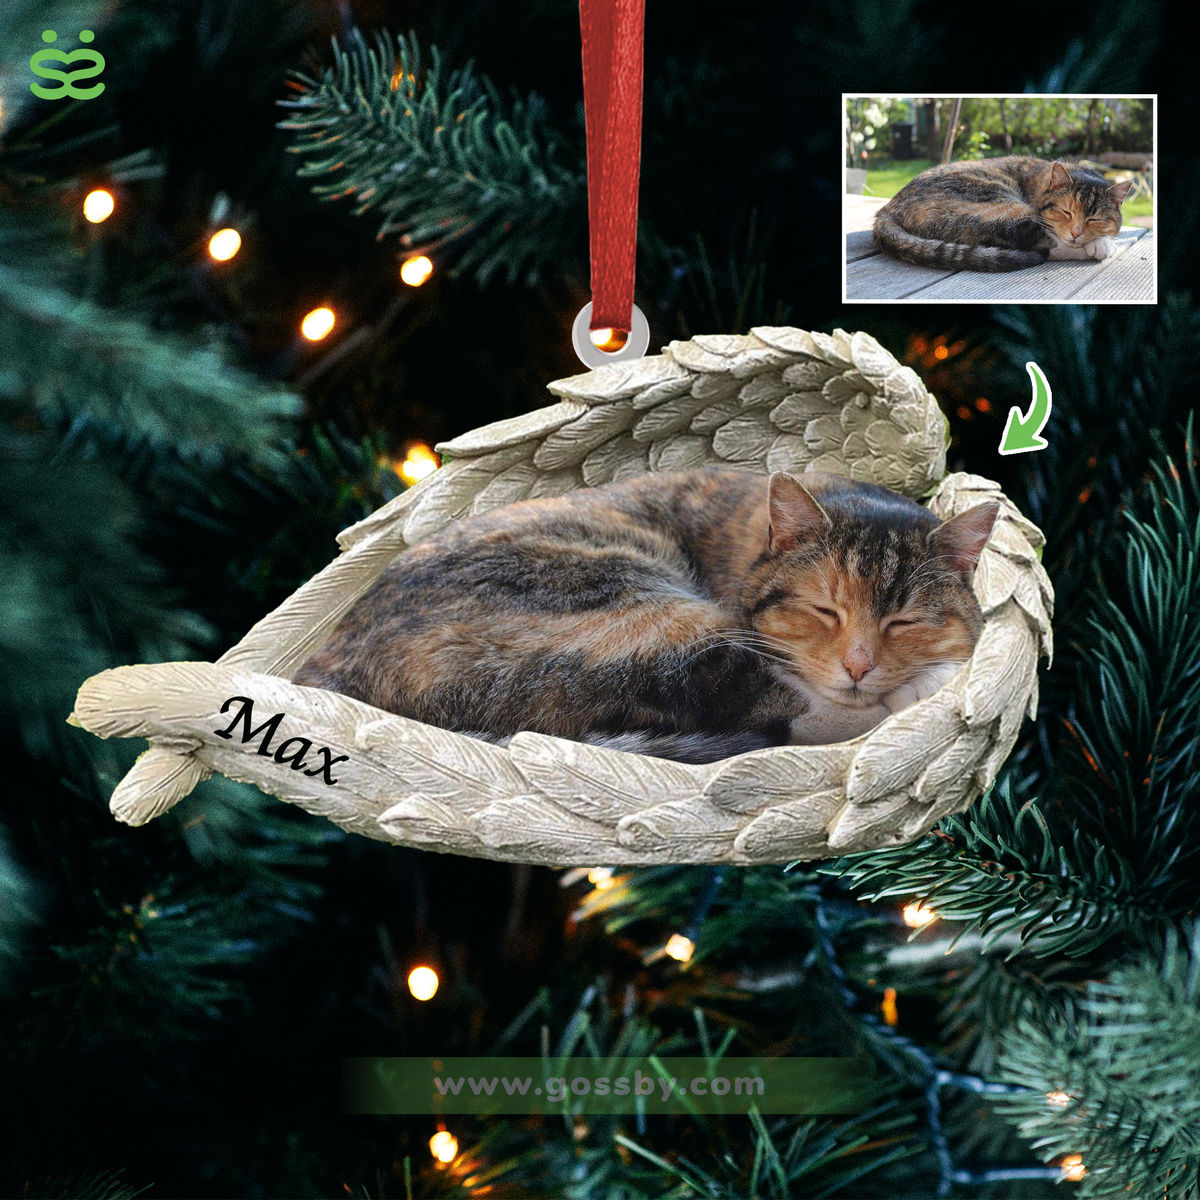 Dog Acrylic Ornament - Dog Lover Gifts - Sleeping Pet Within Angel Wings - Custom Ornament from Photo_3